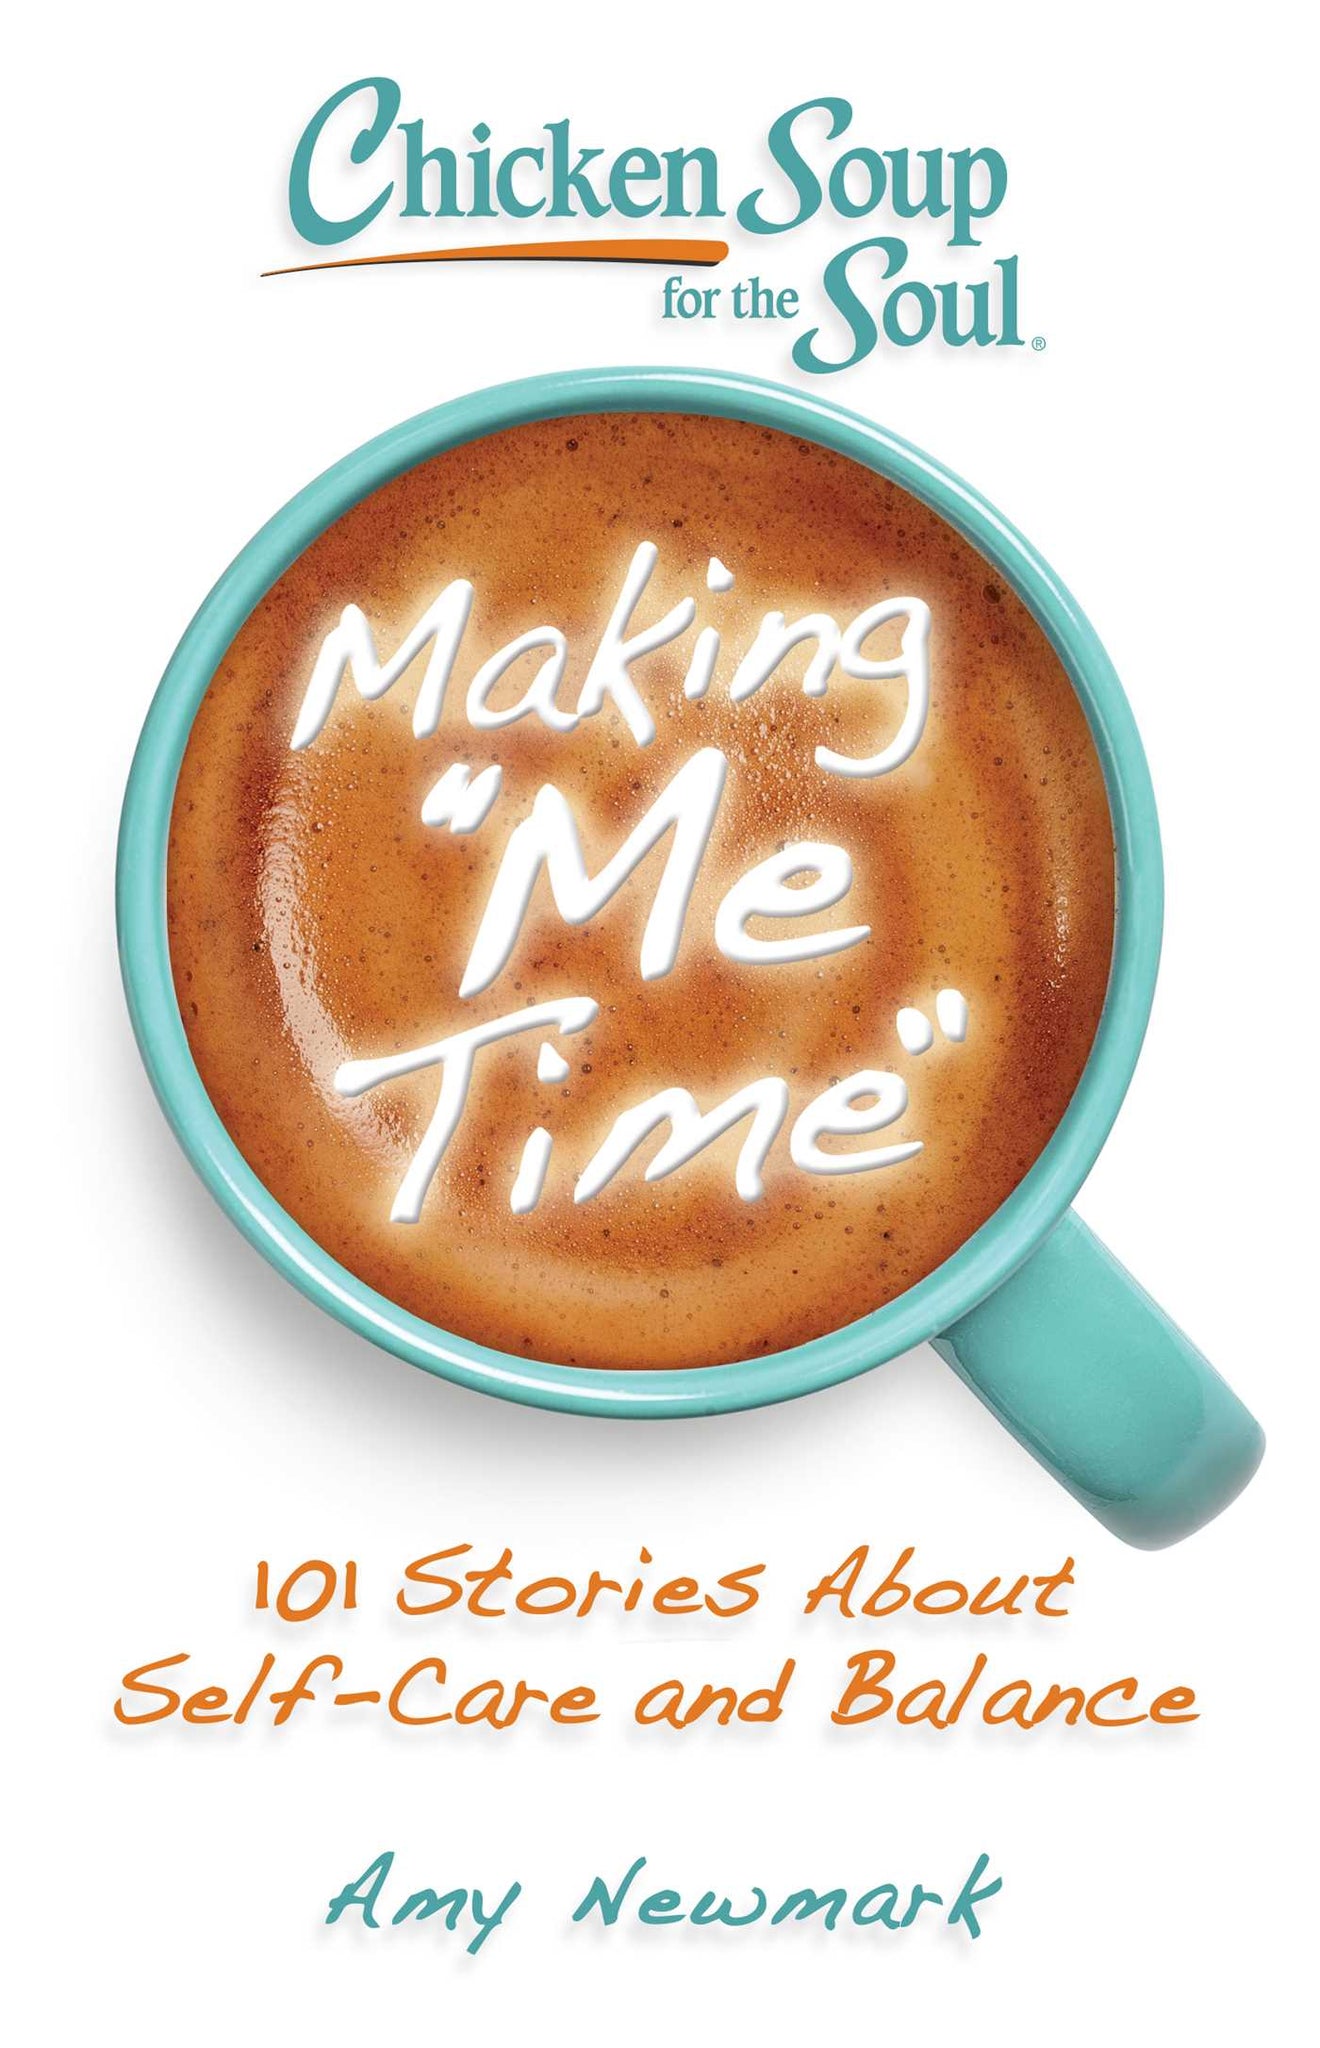 Chicken Soup for the Soul: Making Me Time : 101 Stories About Self-Care and Balance